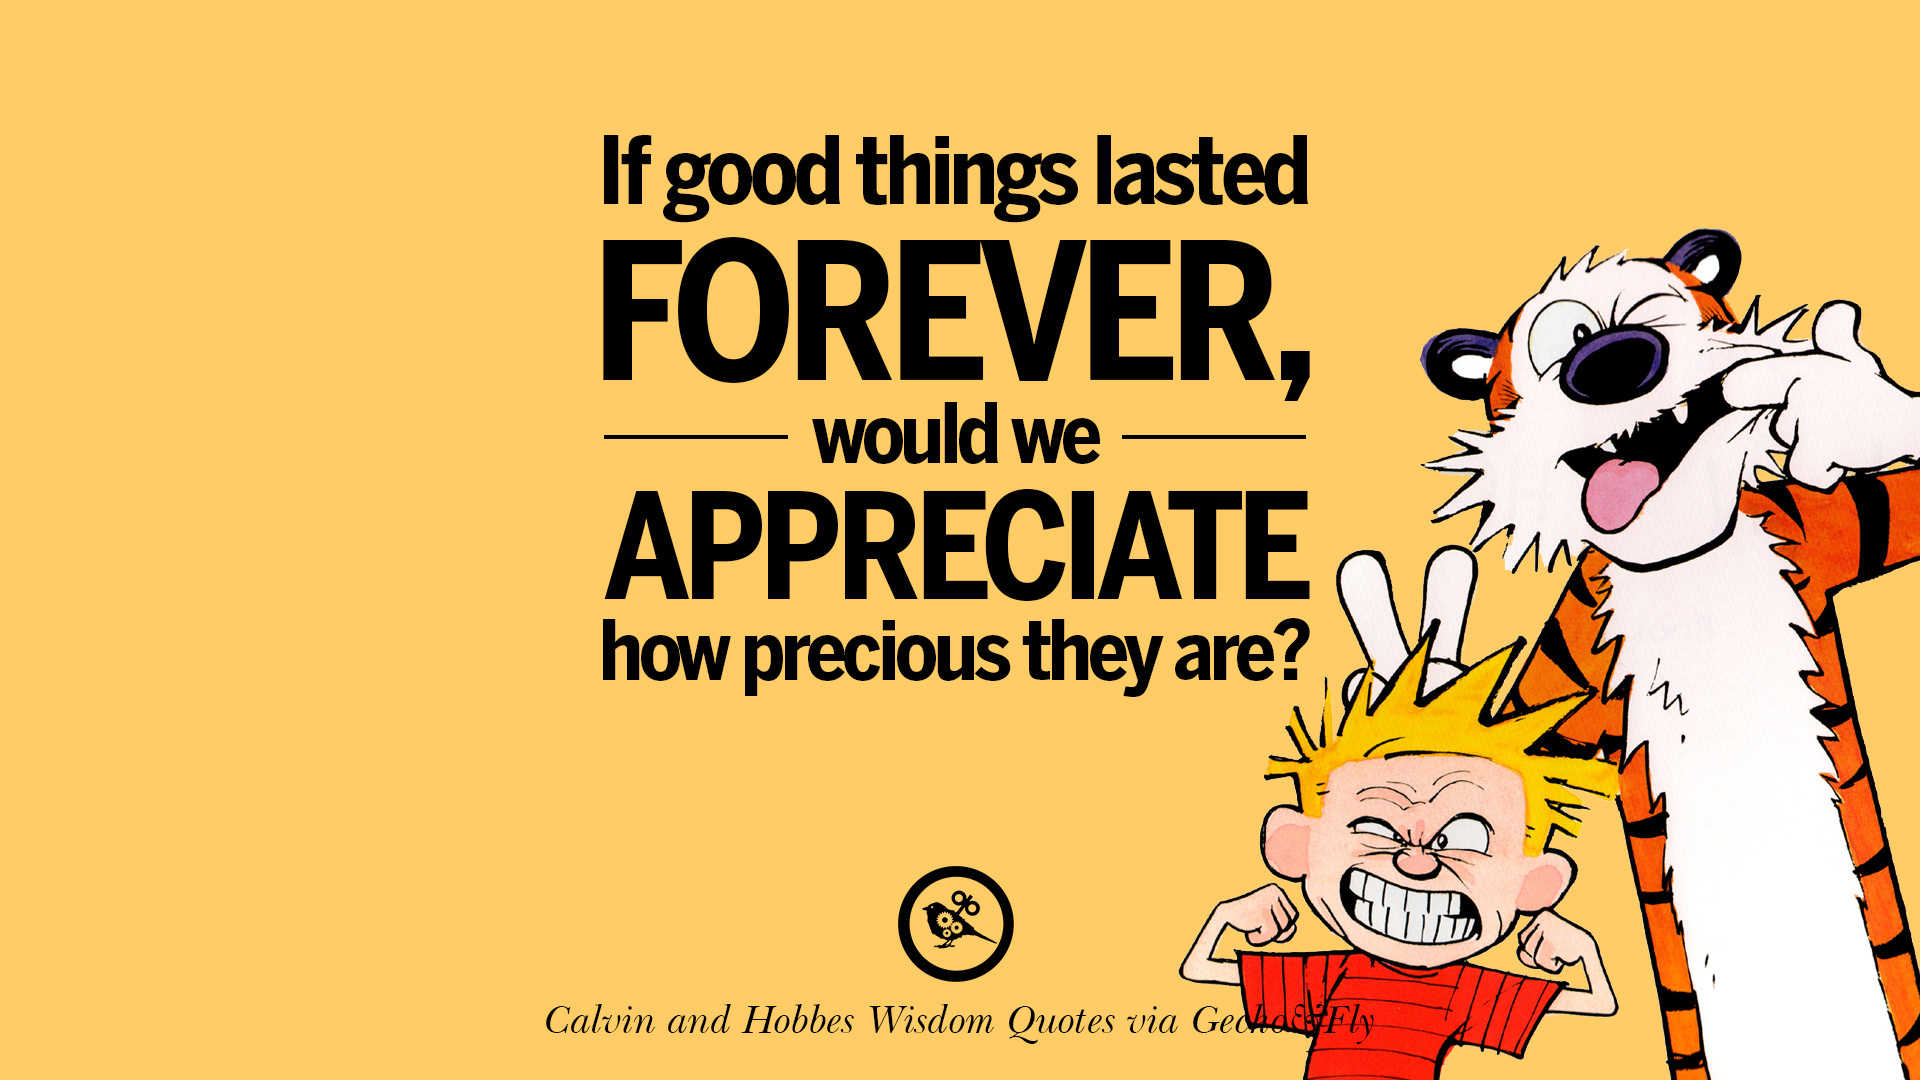 10 Calvin And Hobbes Words Of Wisdom Quotes And Wise Sayings